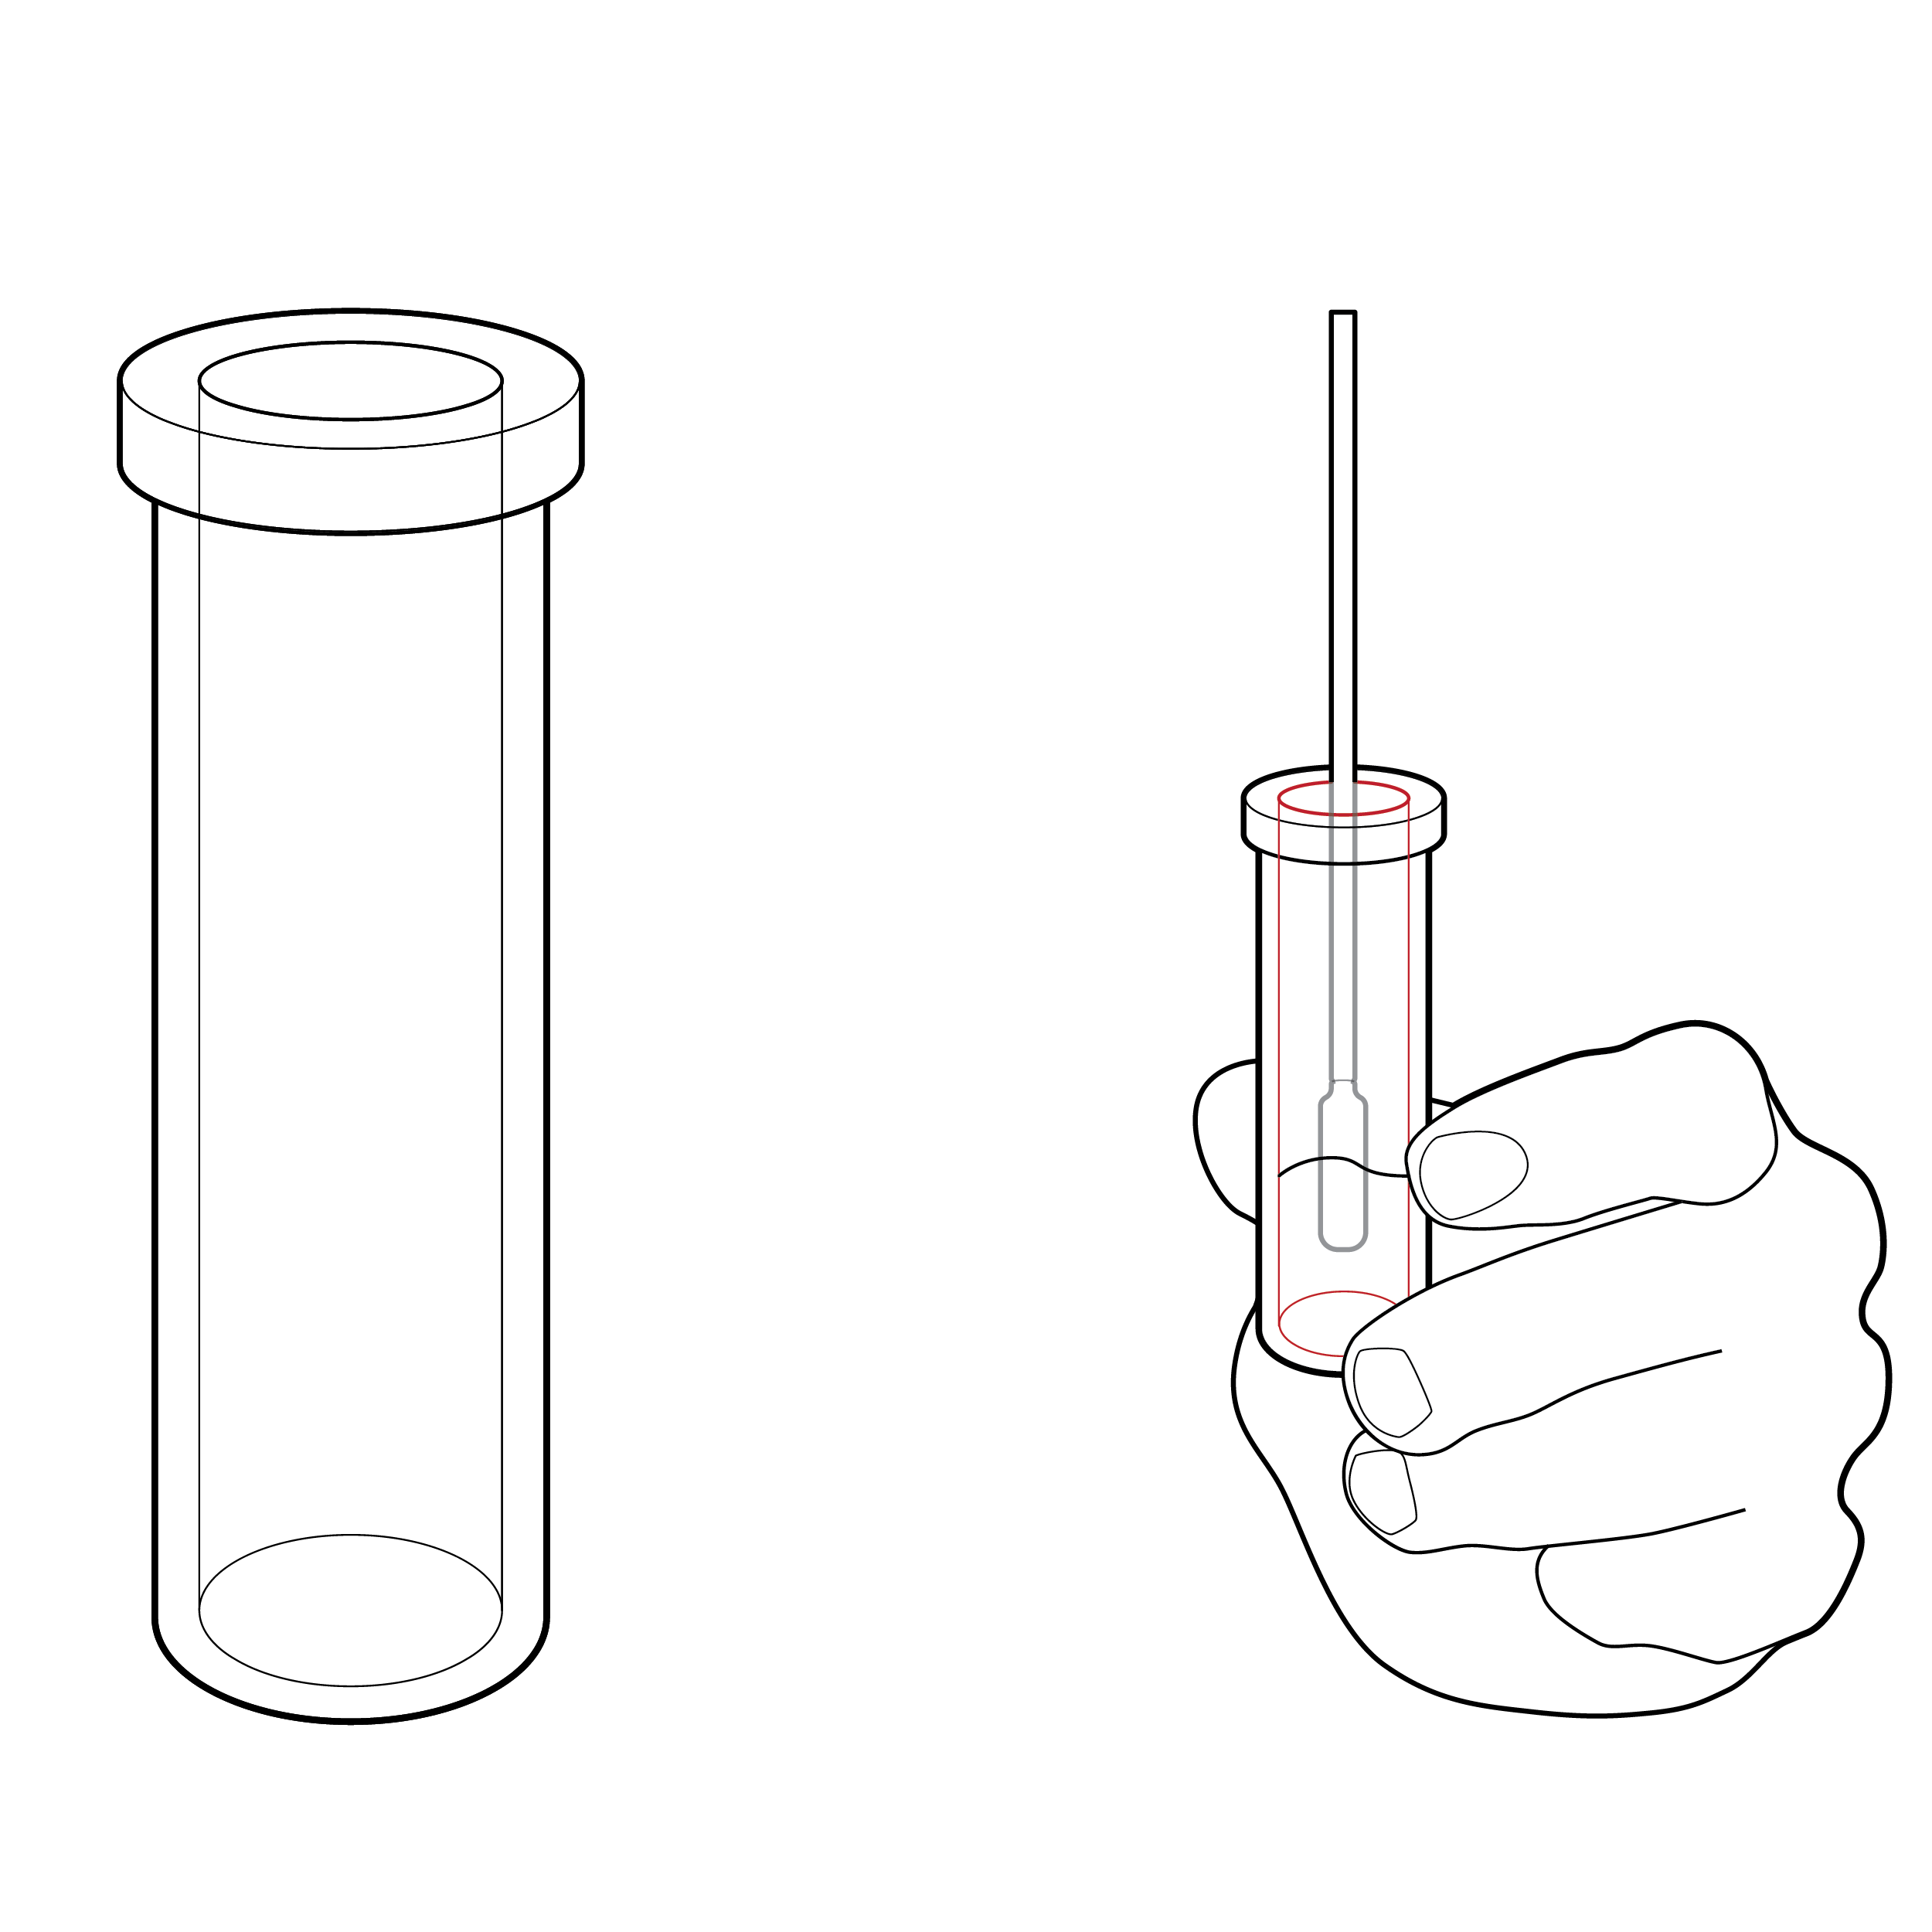 On the left, a cylindrical fluid vial. On the right, a hand holding the vial by thumb and forefinger, and a swab inserted into the solution in the vial. Red shading on the vial indicates squeezing the vial around the swab to extract sample is difficult.